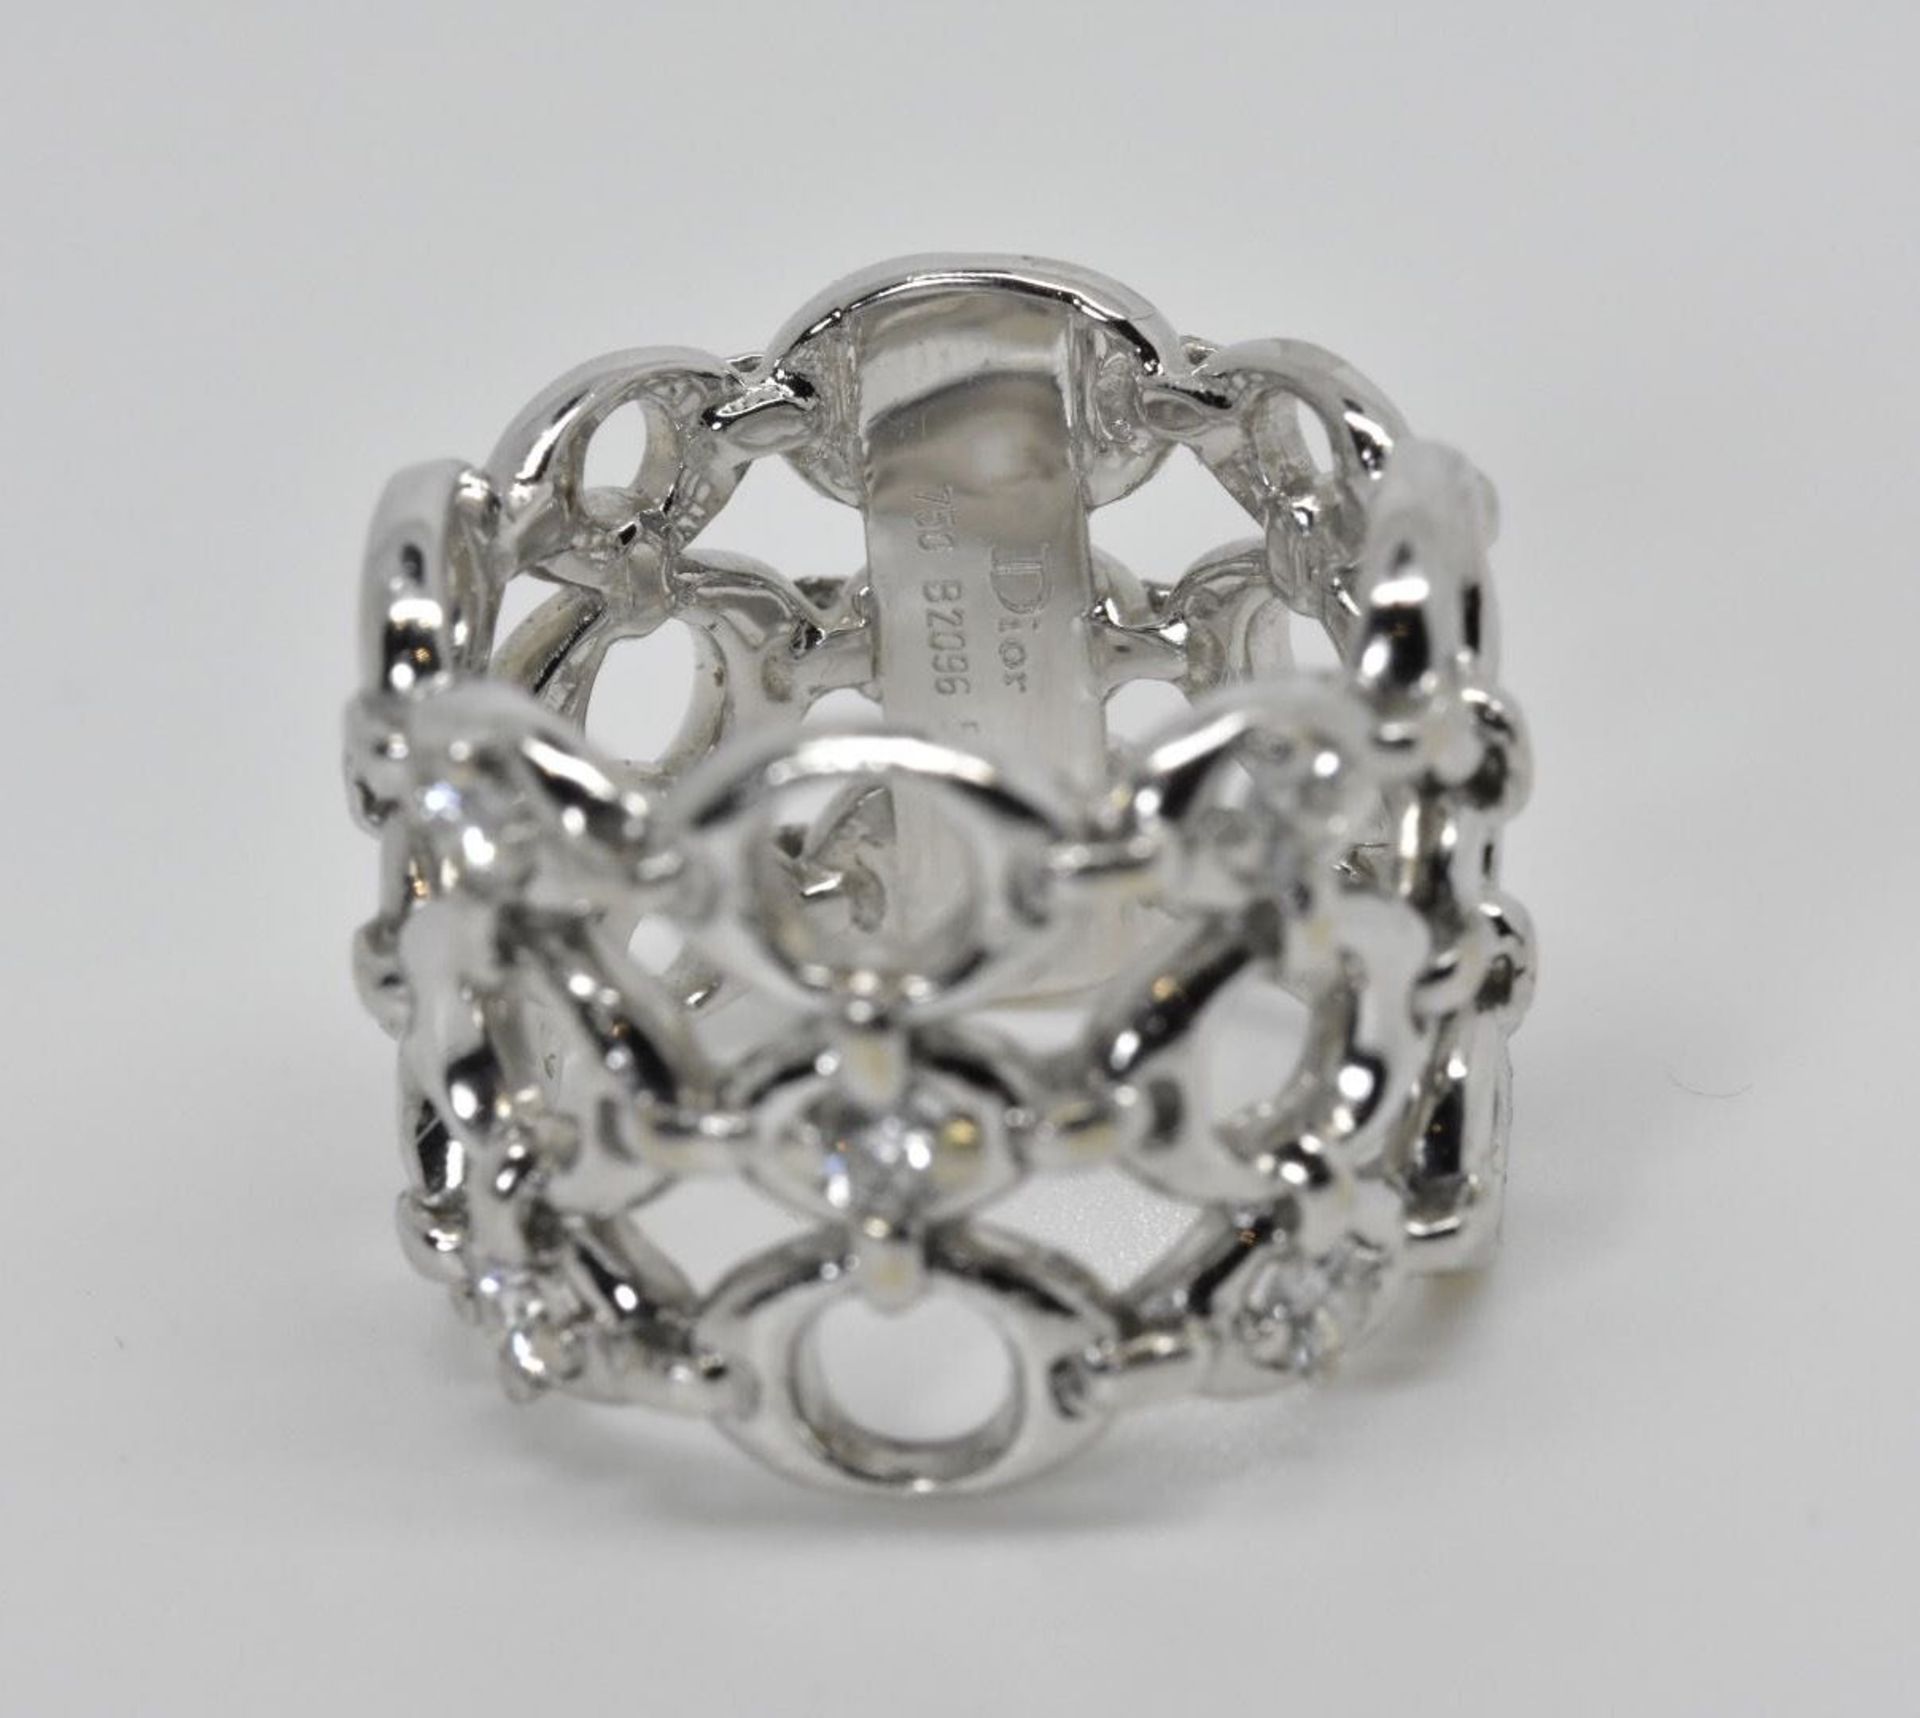 Christian Dior Diamond Ring set in 18 ct White Gold - Image 12 of 12